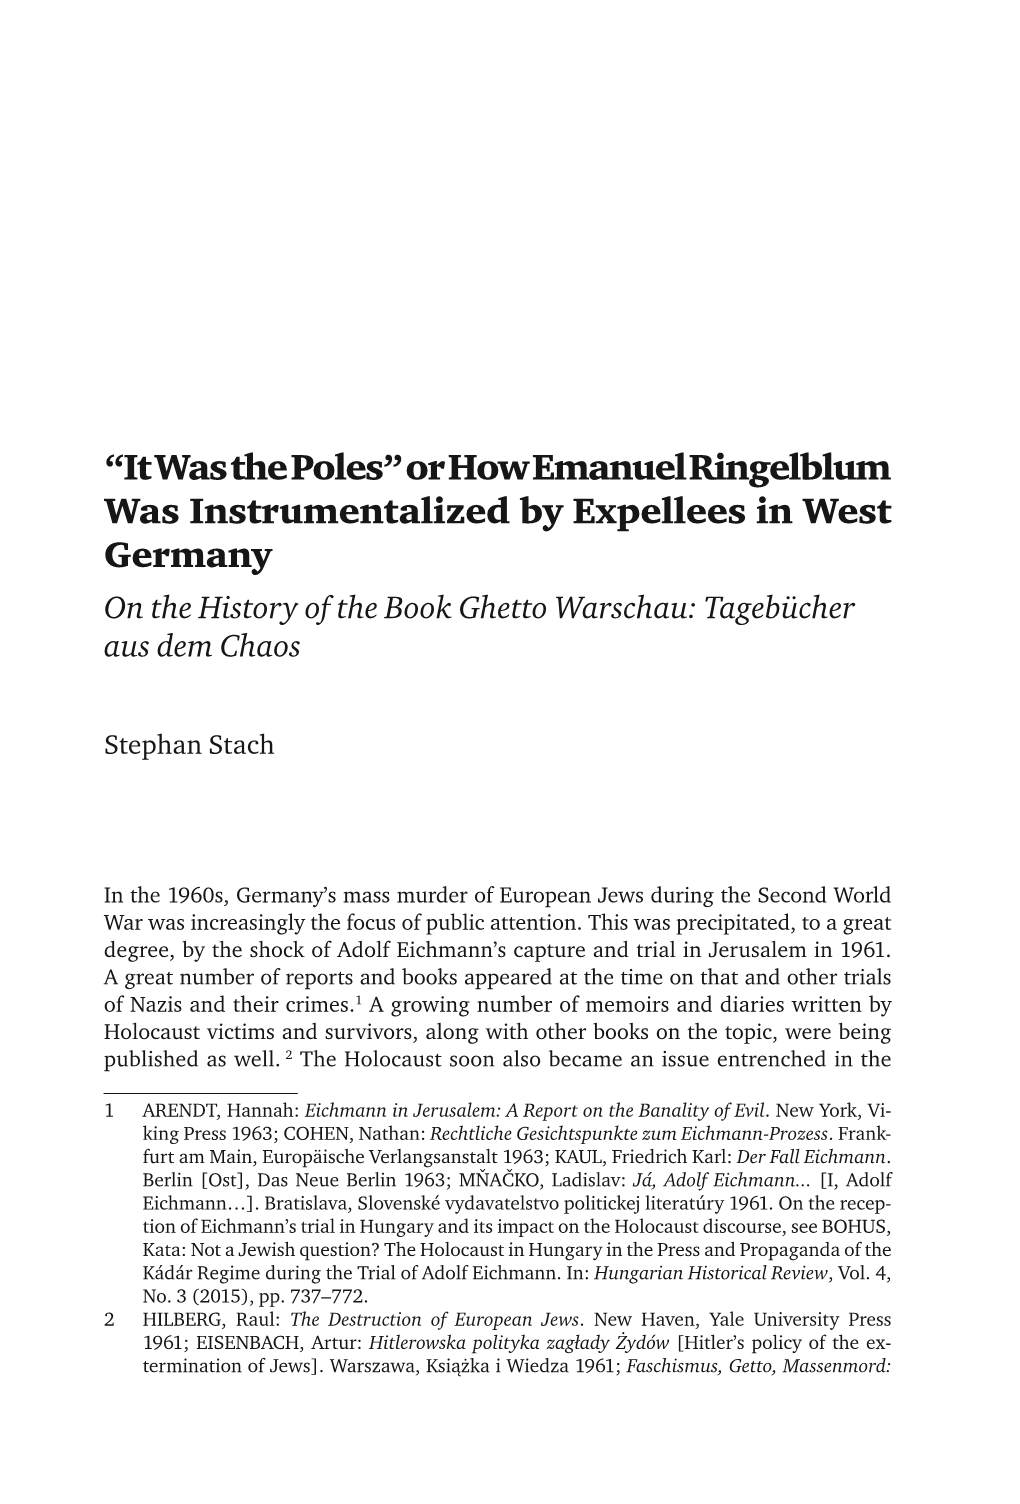 Or How Emanuel Ringelblum Was Instrumentalized by Expellees in West Germany on the History of the Book Ghetto Warschau: Tagebücher Aus Dem Chaos